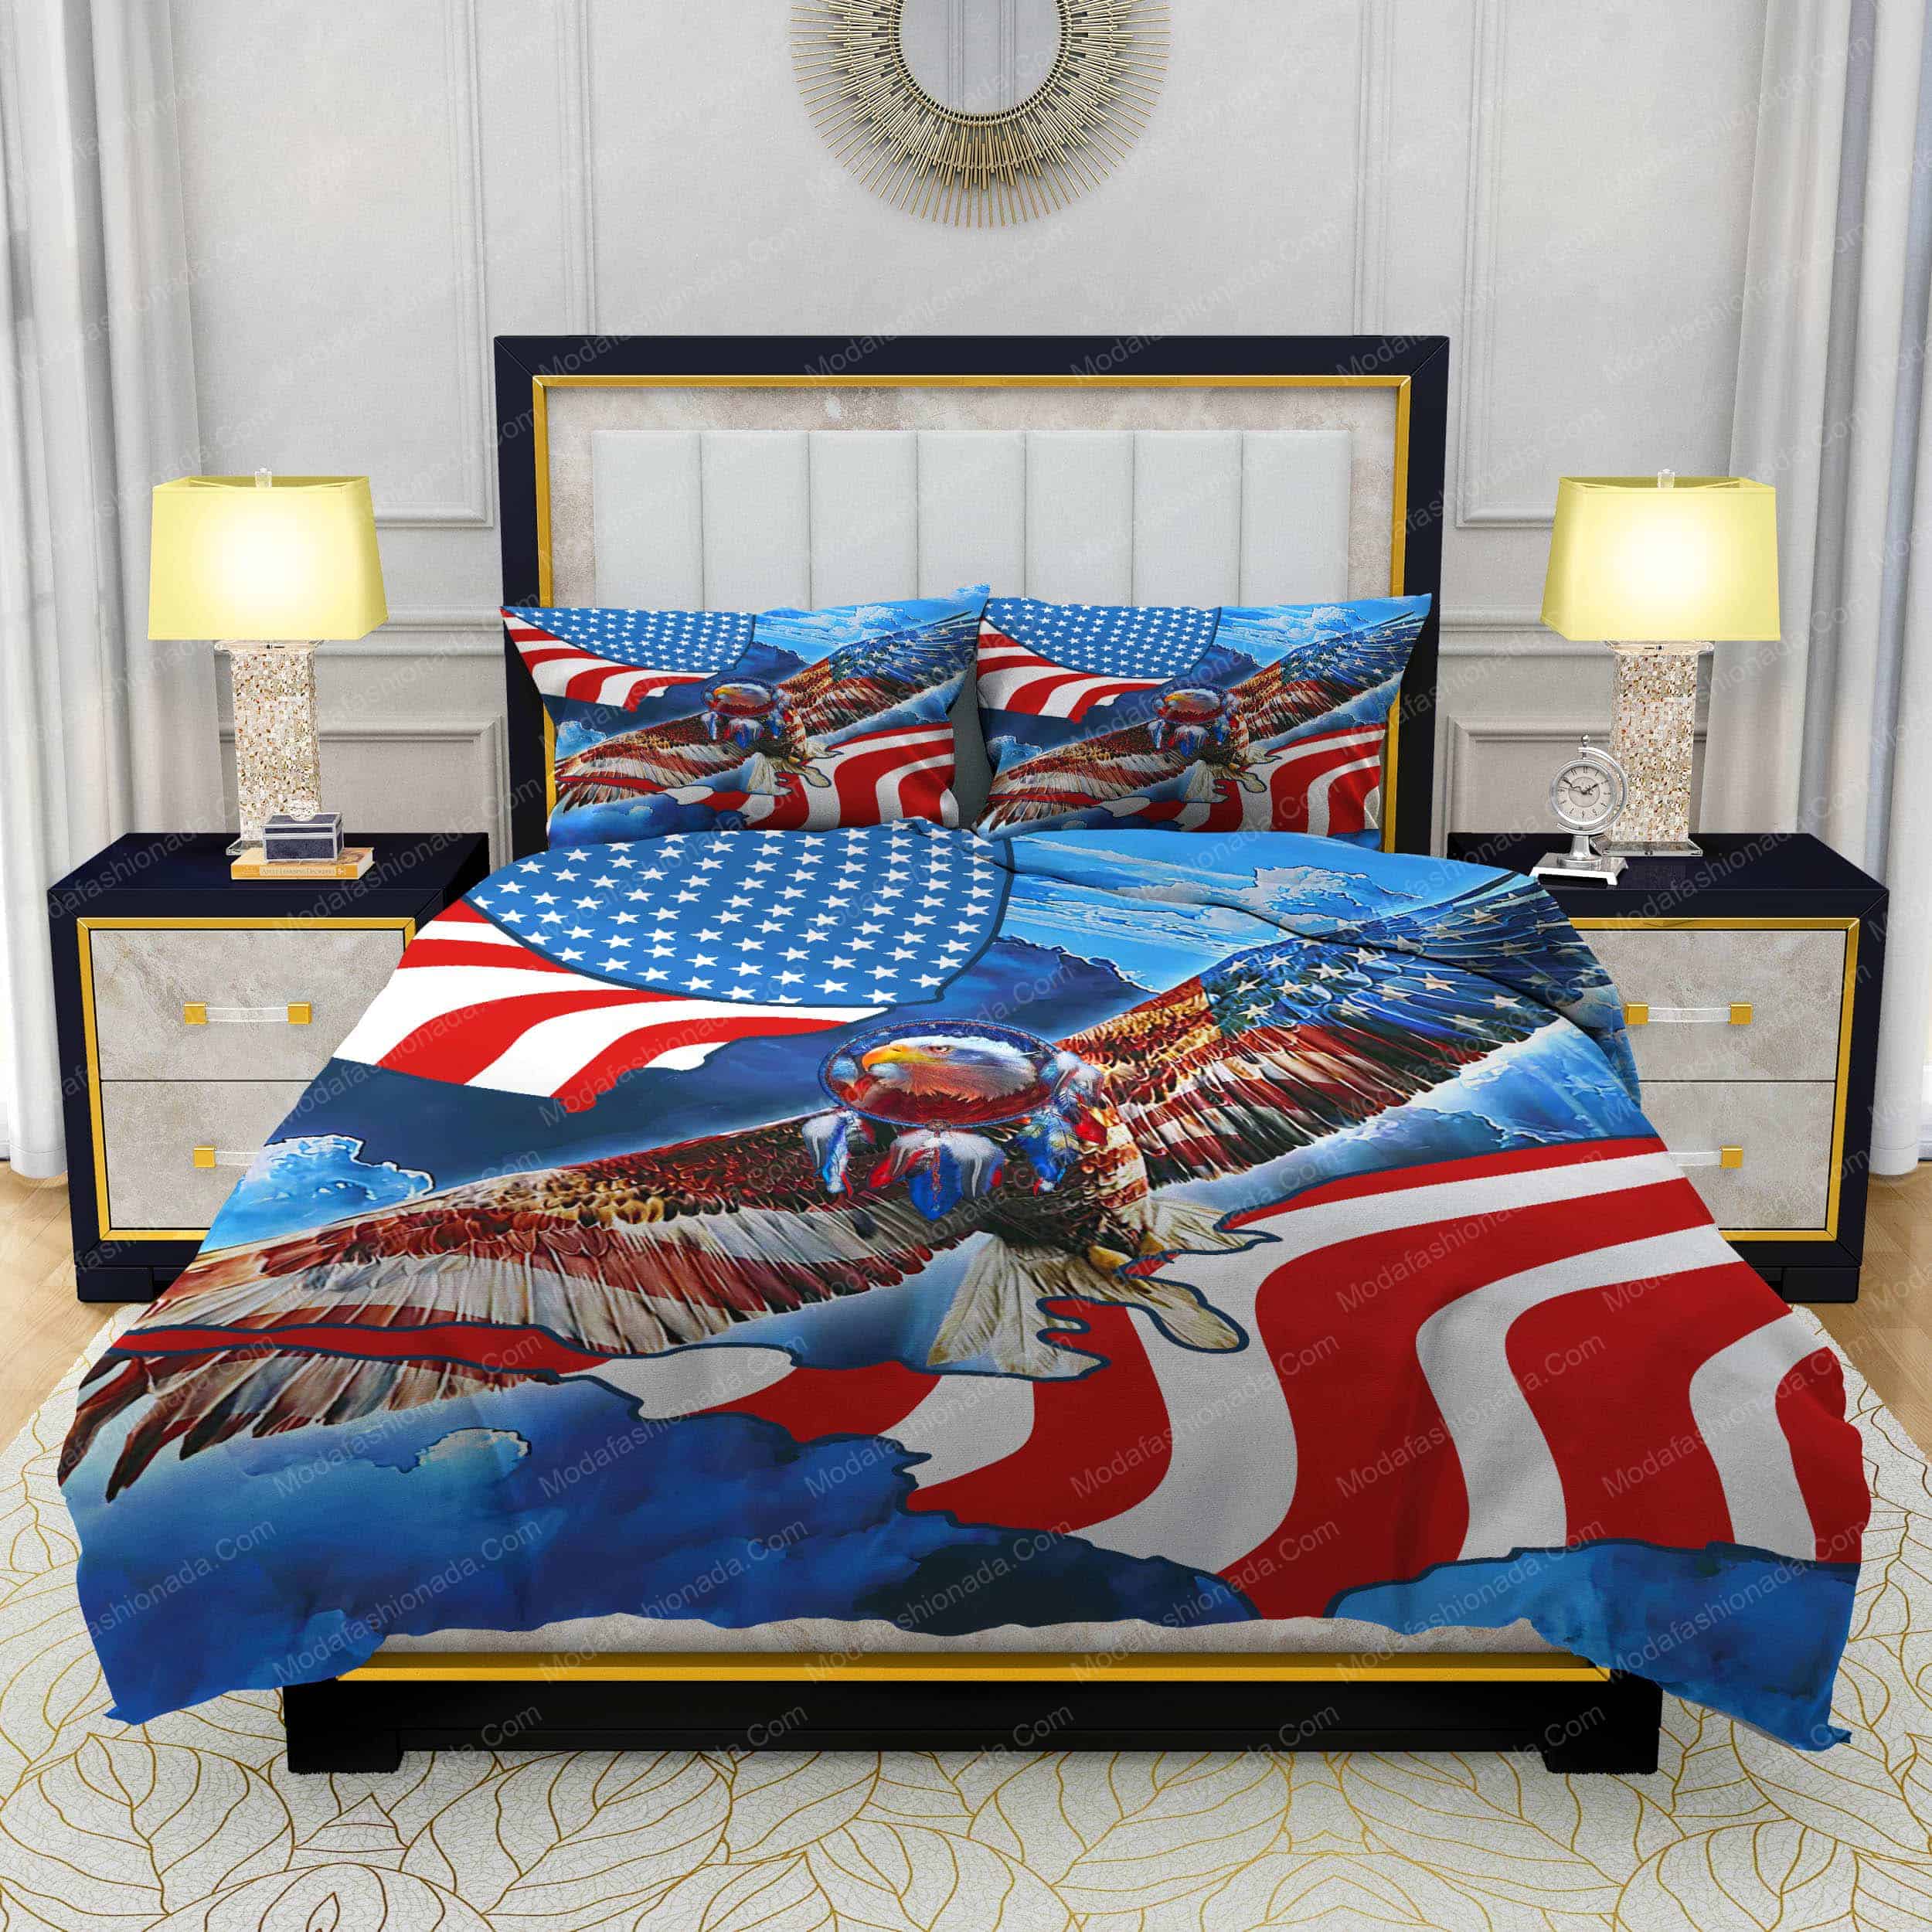 Personalized Bedding Sets